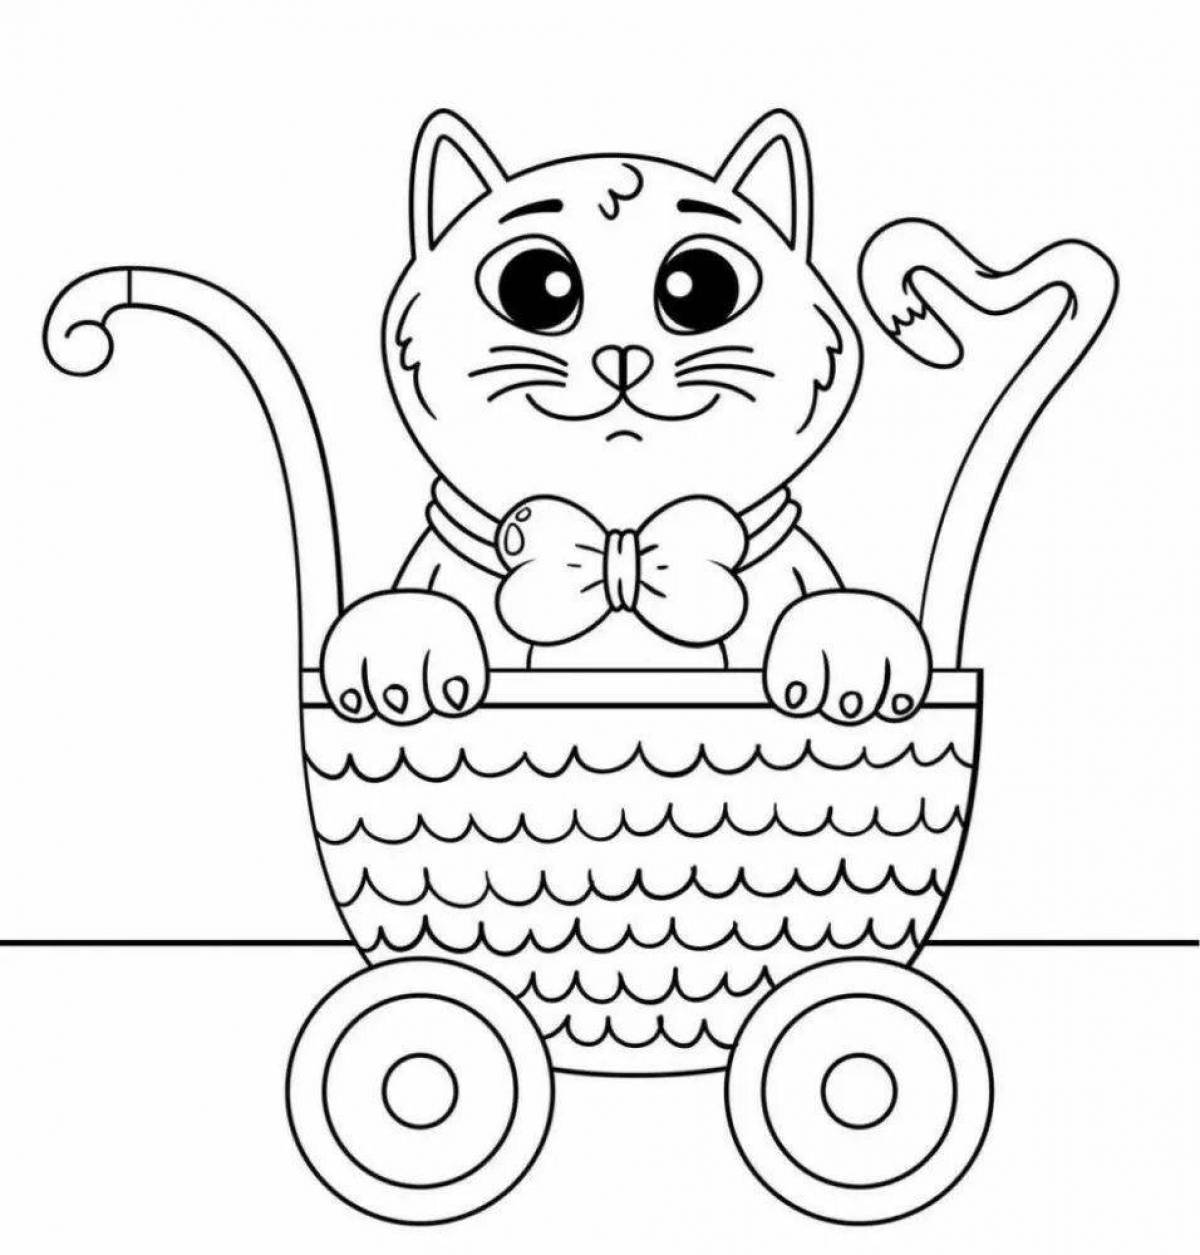 Coloring page bold cat in a mug